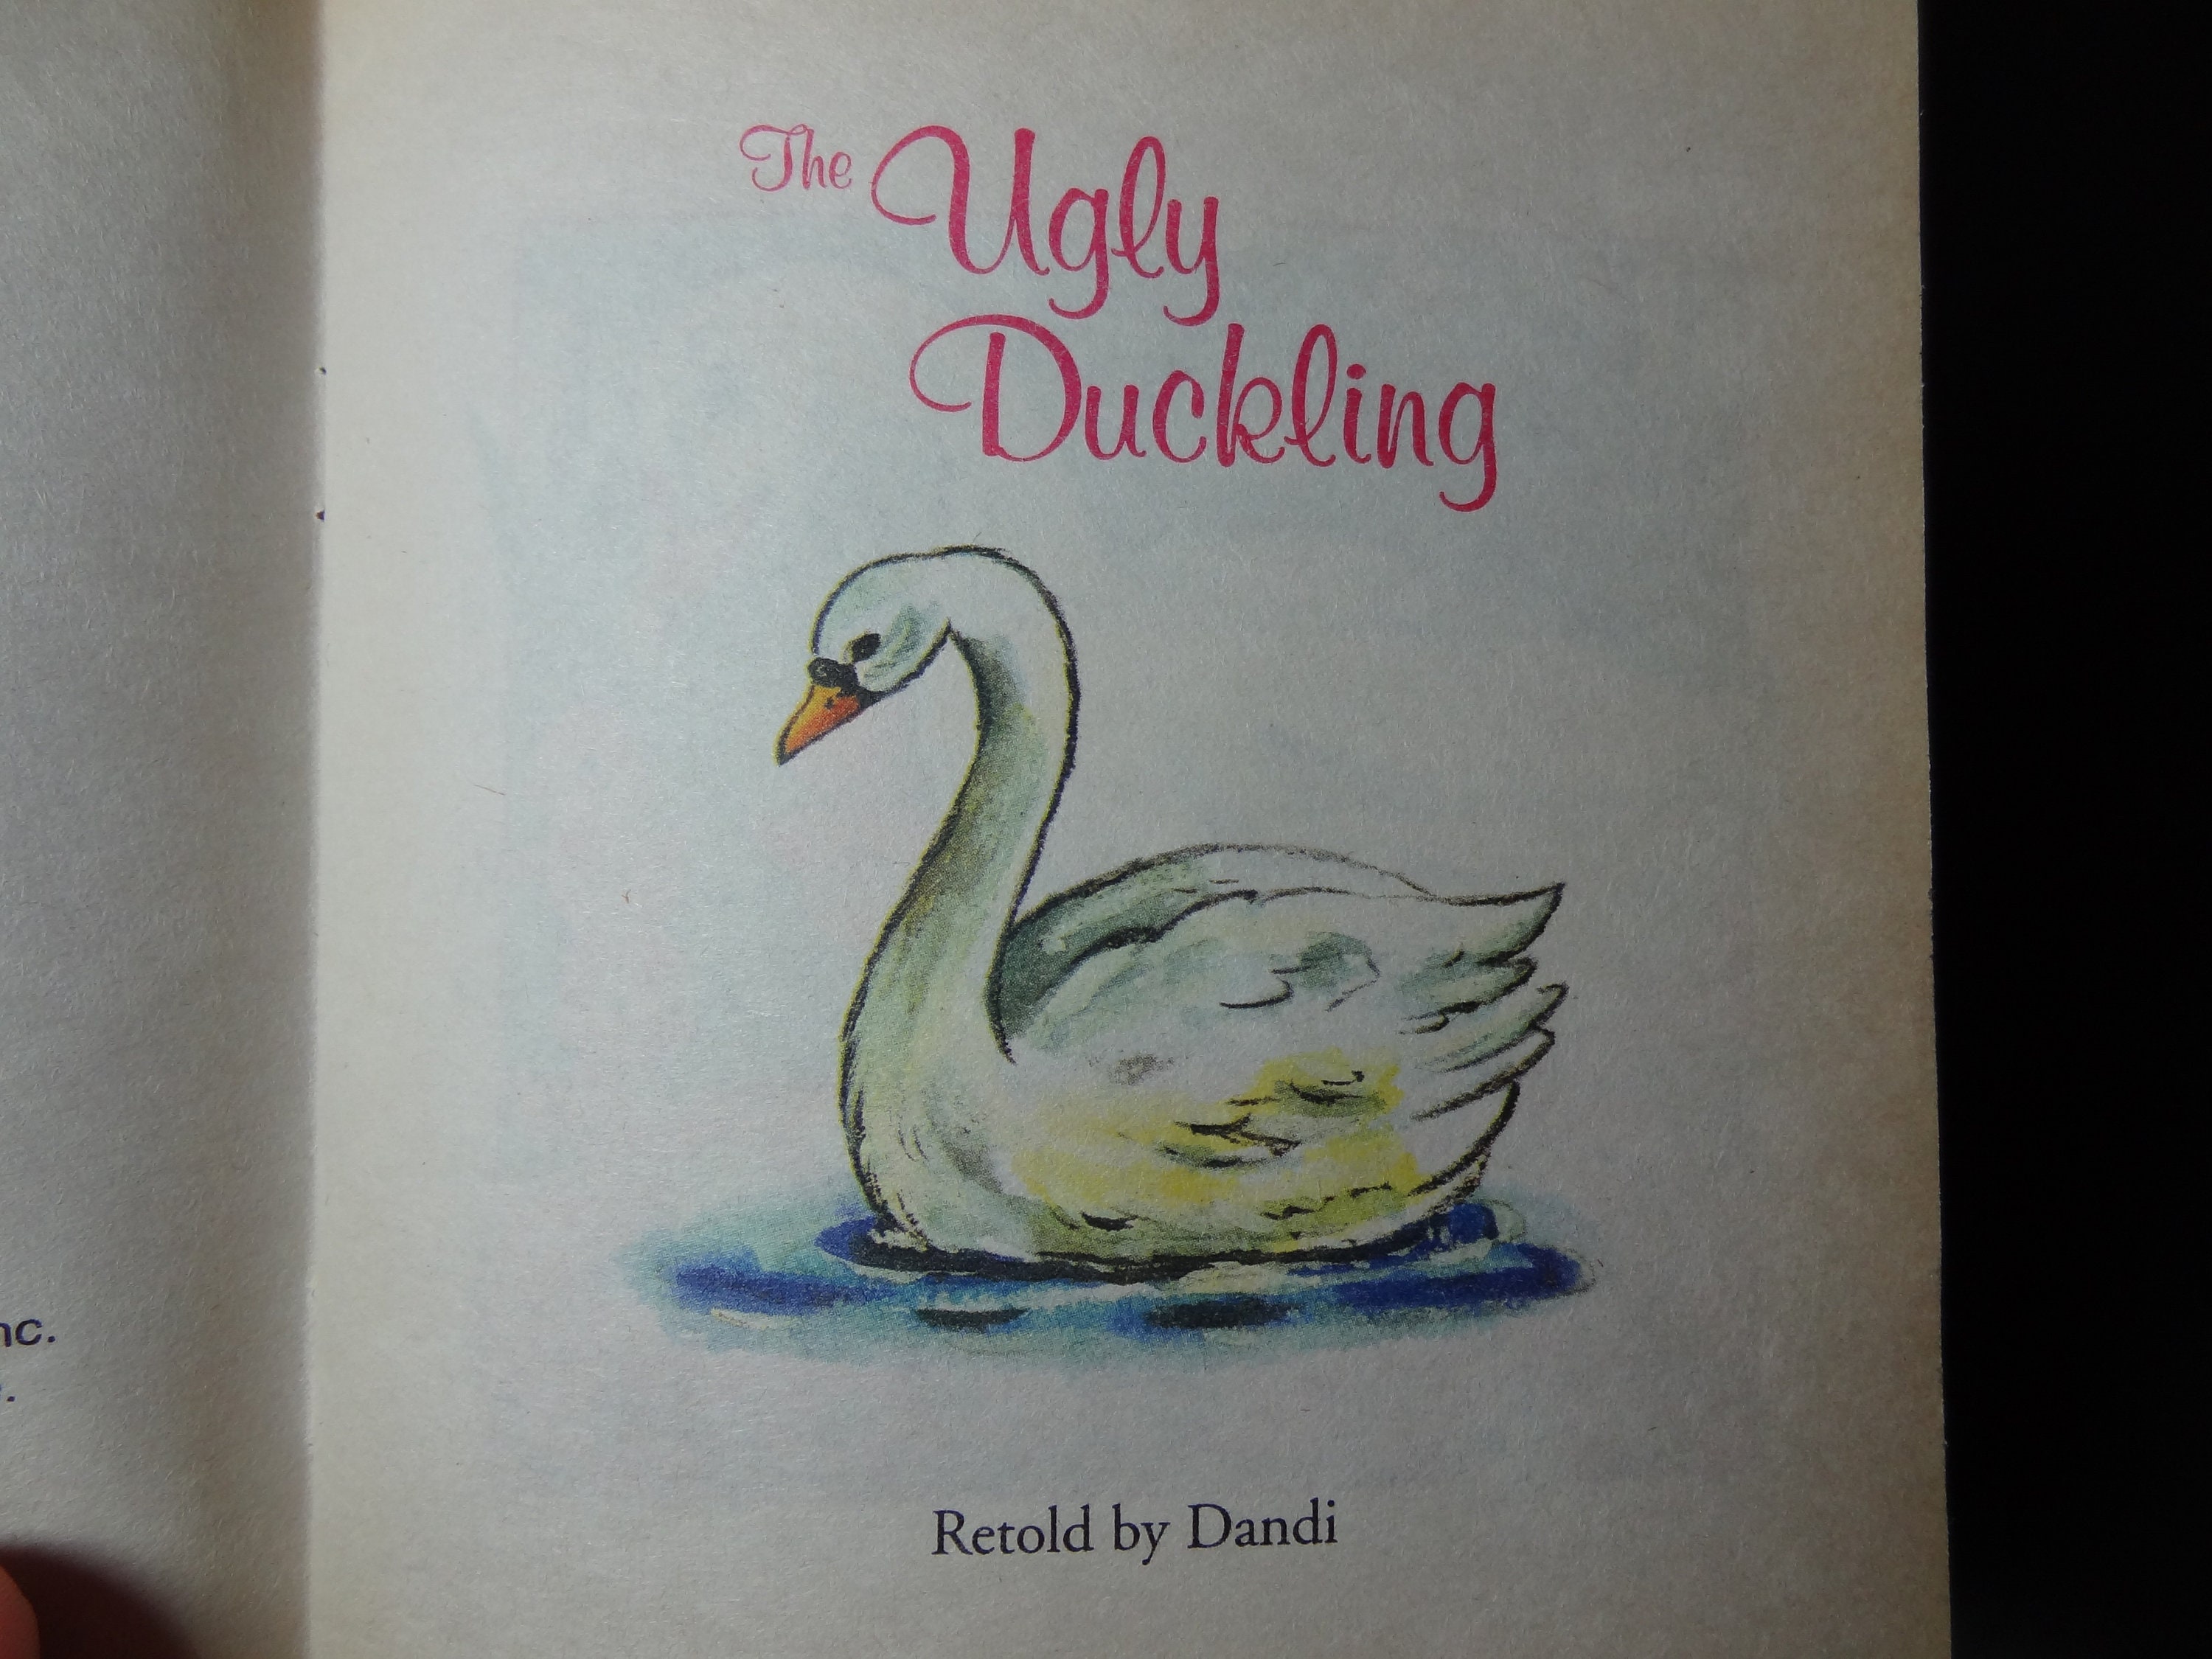 The Ugly Duckling Retold by Dandi Copyright 1996 Vintage